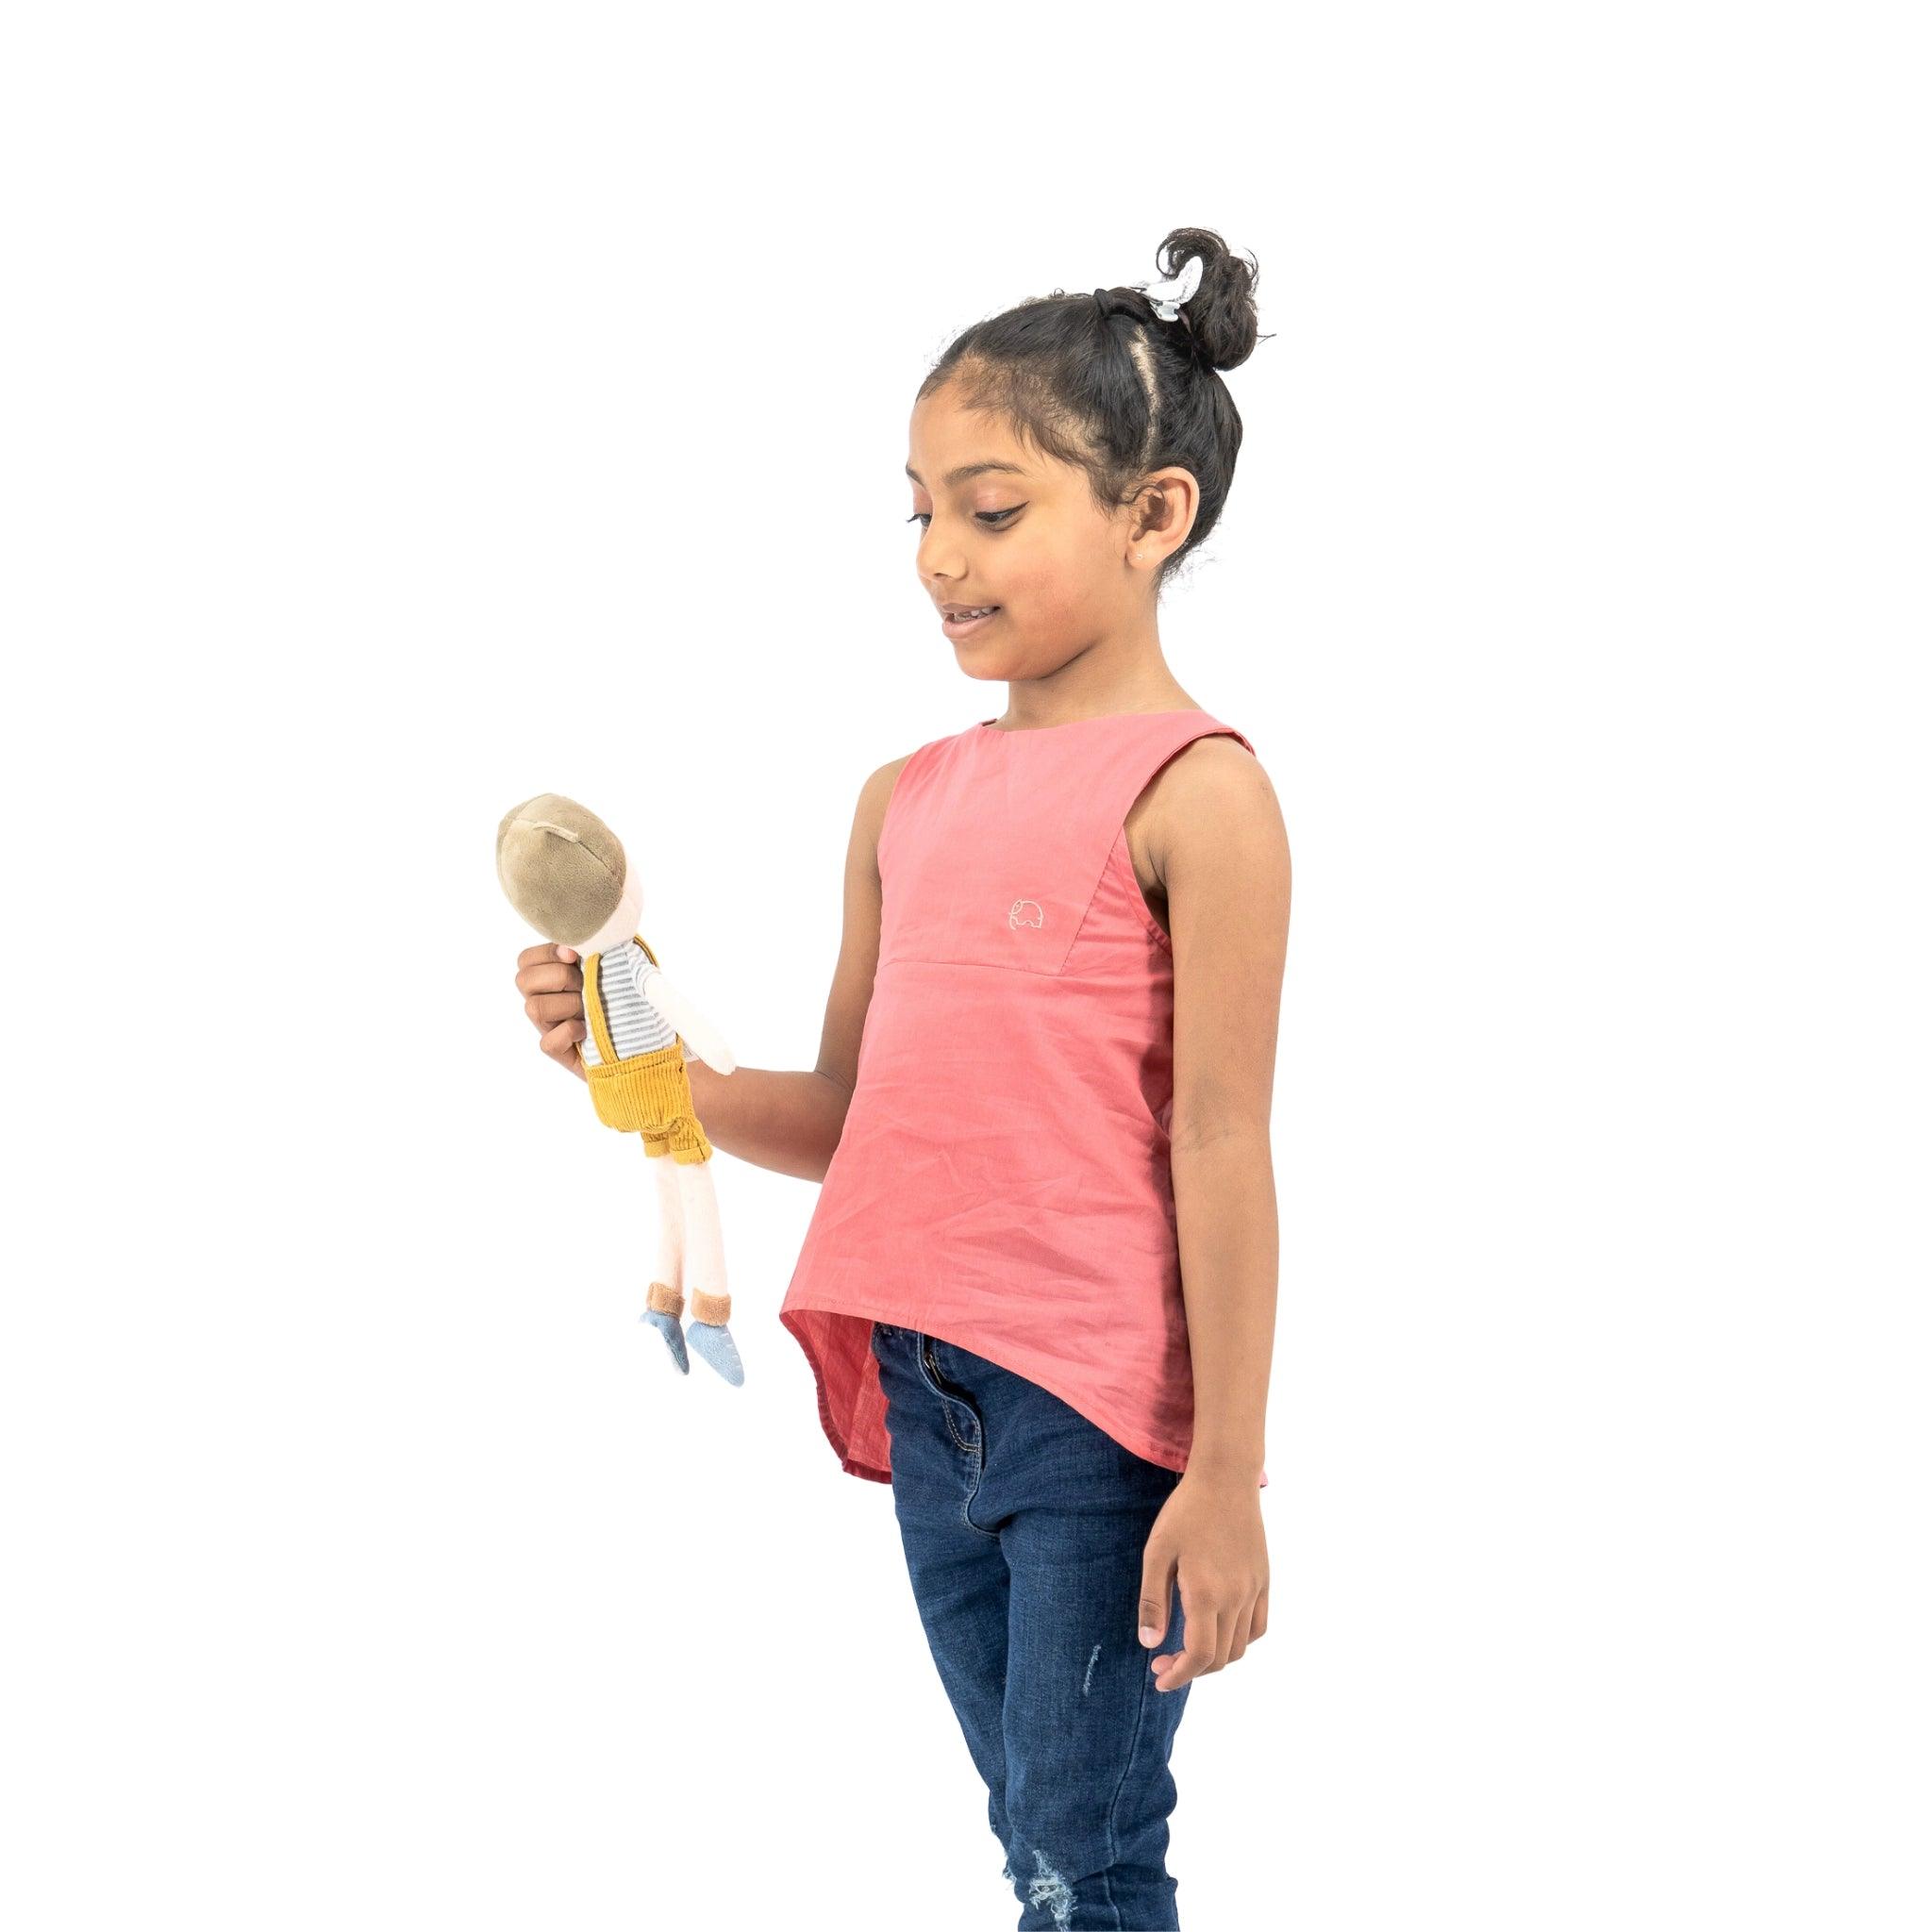 A young girl in a Karee Tea Rose Cotton Bib Neck Top and jeans smiling at a doll she is holding in her right hand, isolated on a white background.